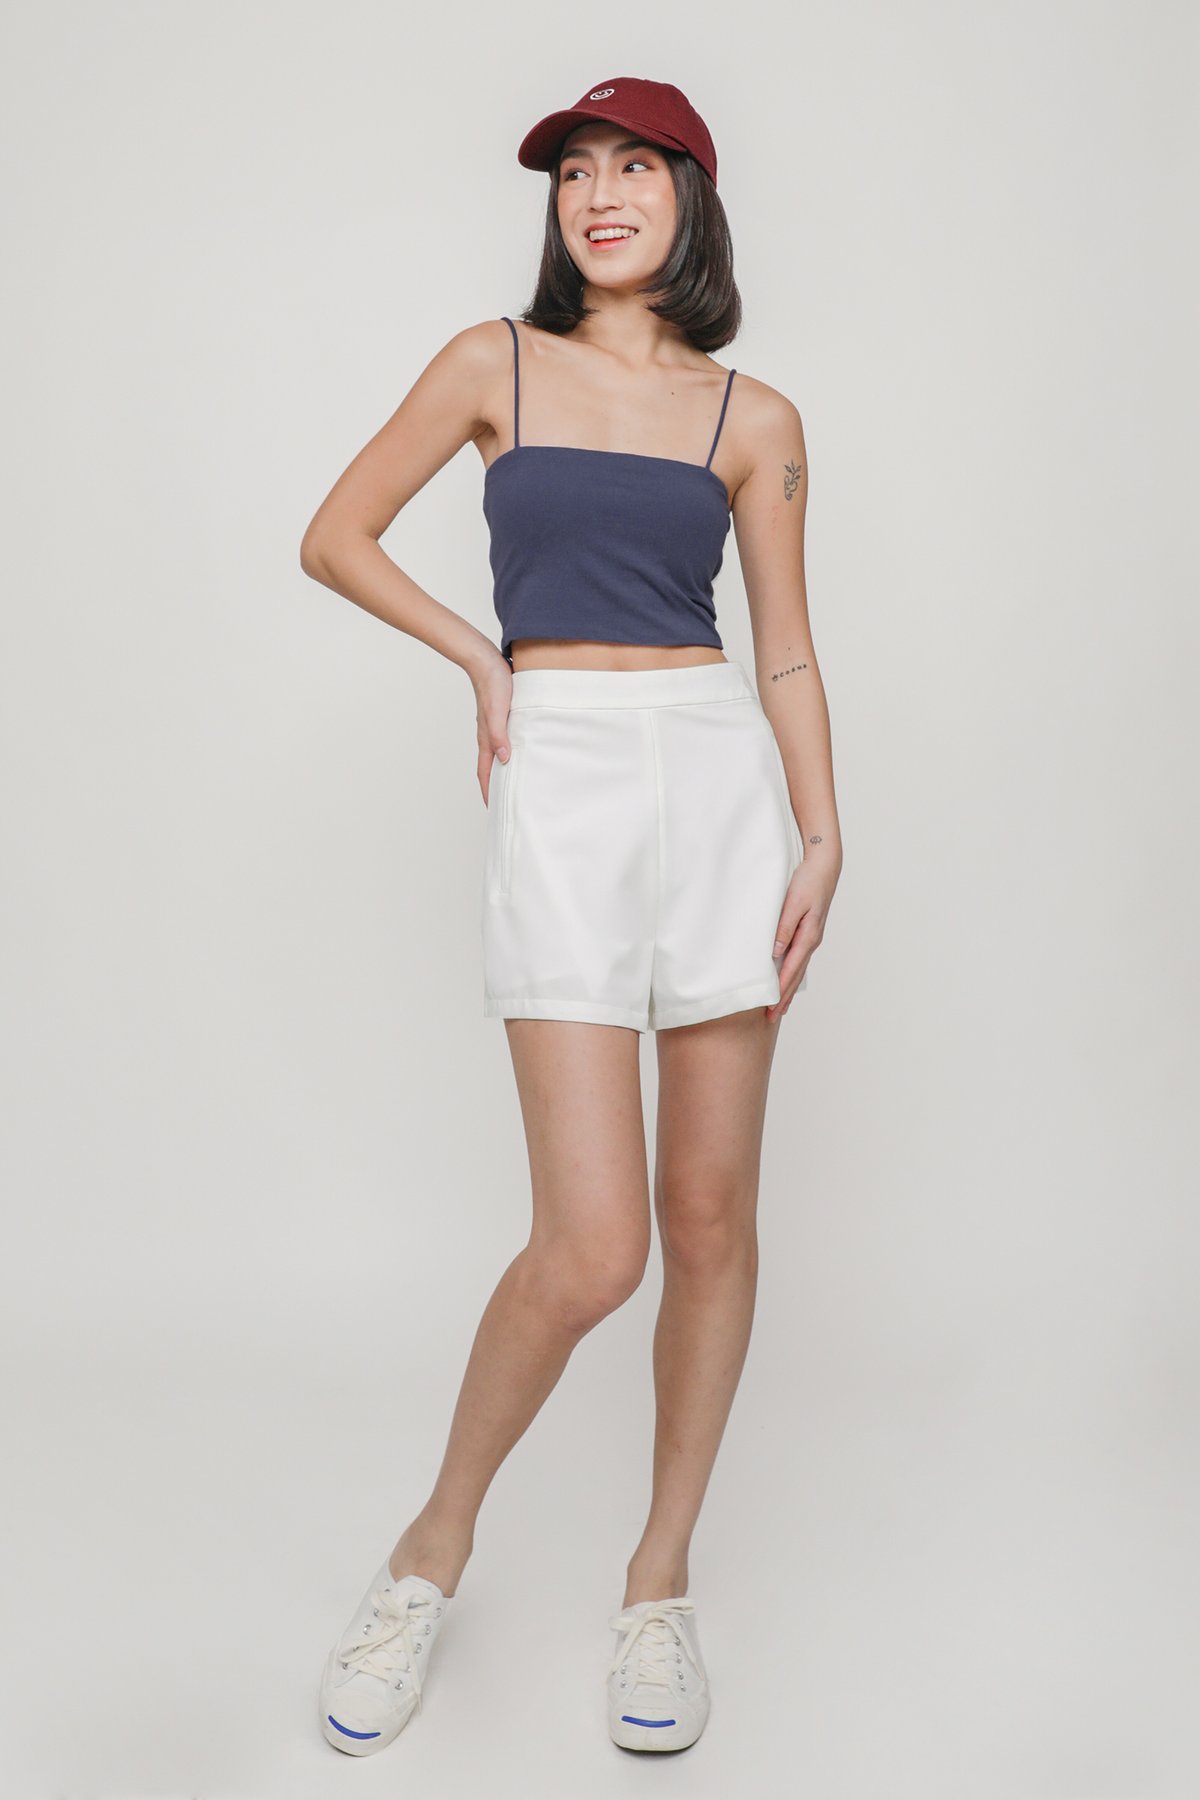 Andes Padded Crop Top (Navy)